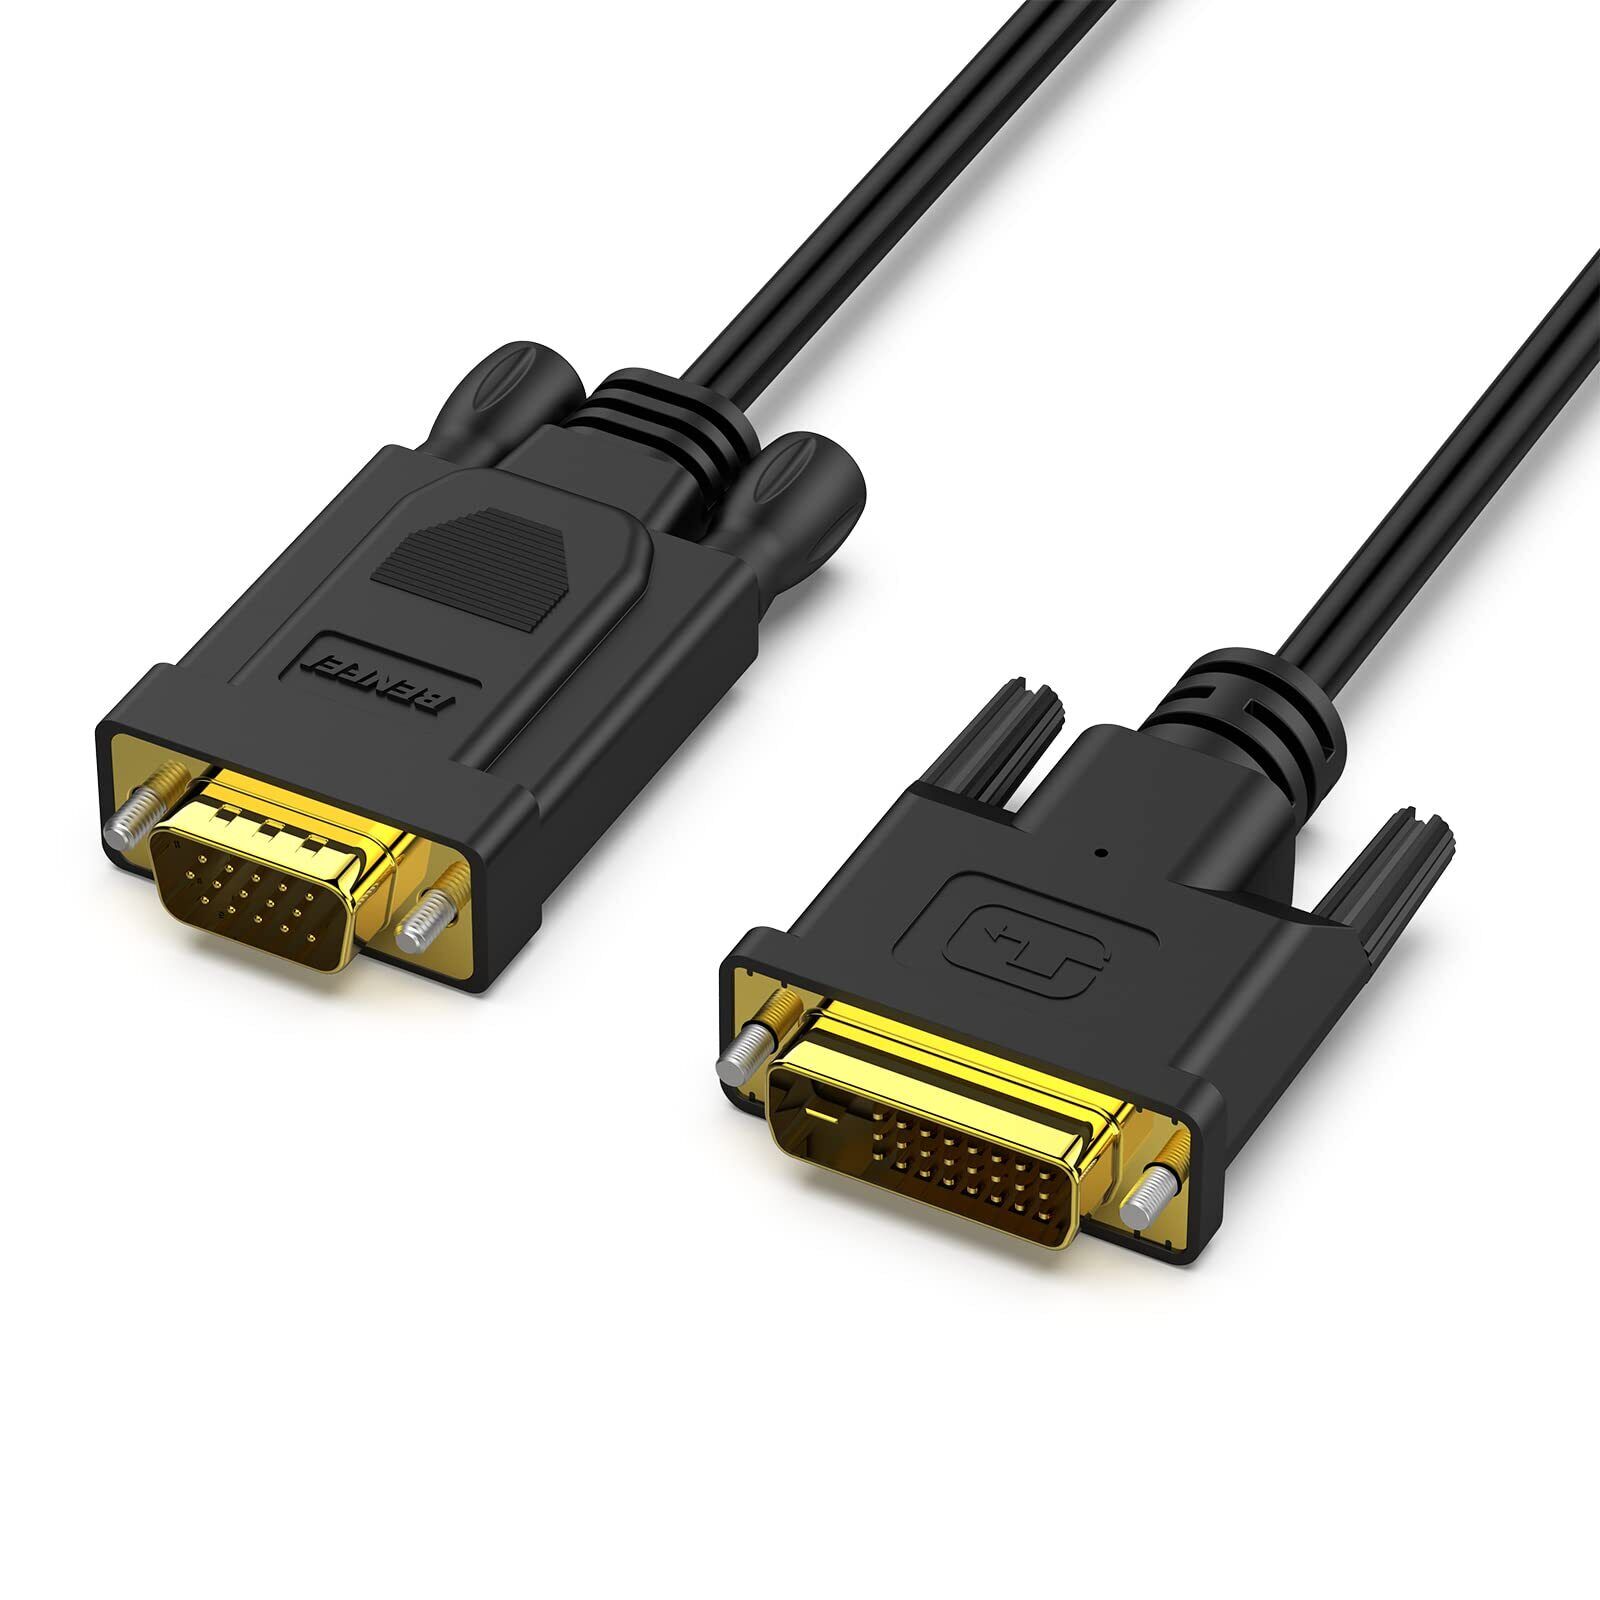 Active DVI-D to VGA, DVI-D 24+1 to VGA 6 Feet Cable Male to Male Gold-Plated ...